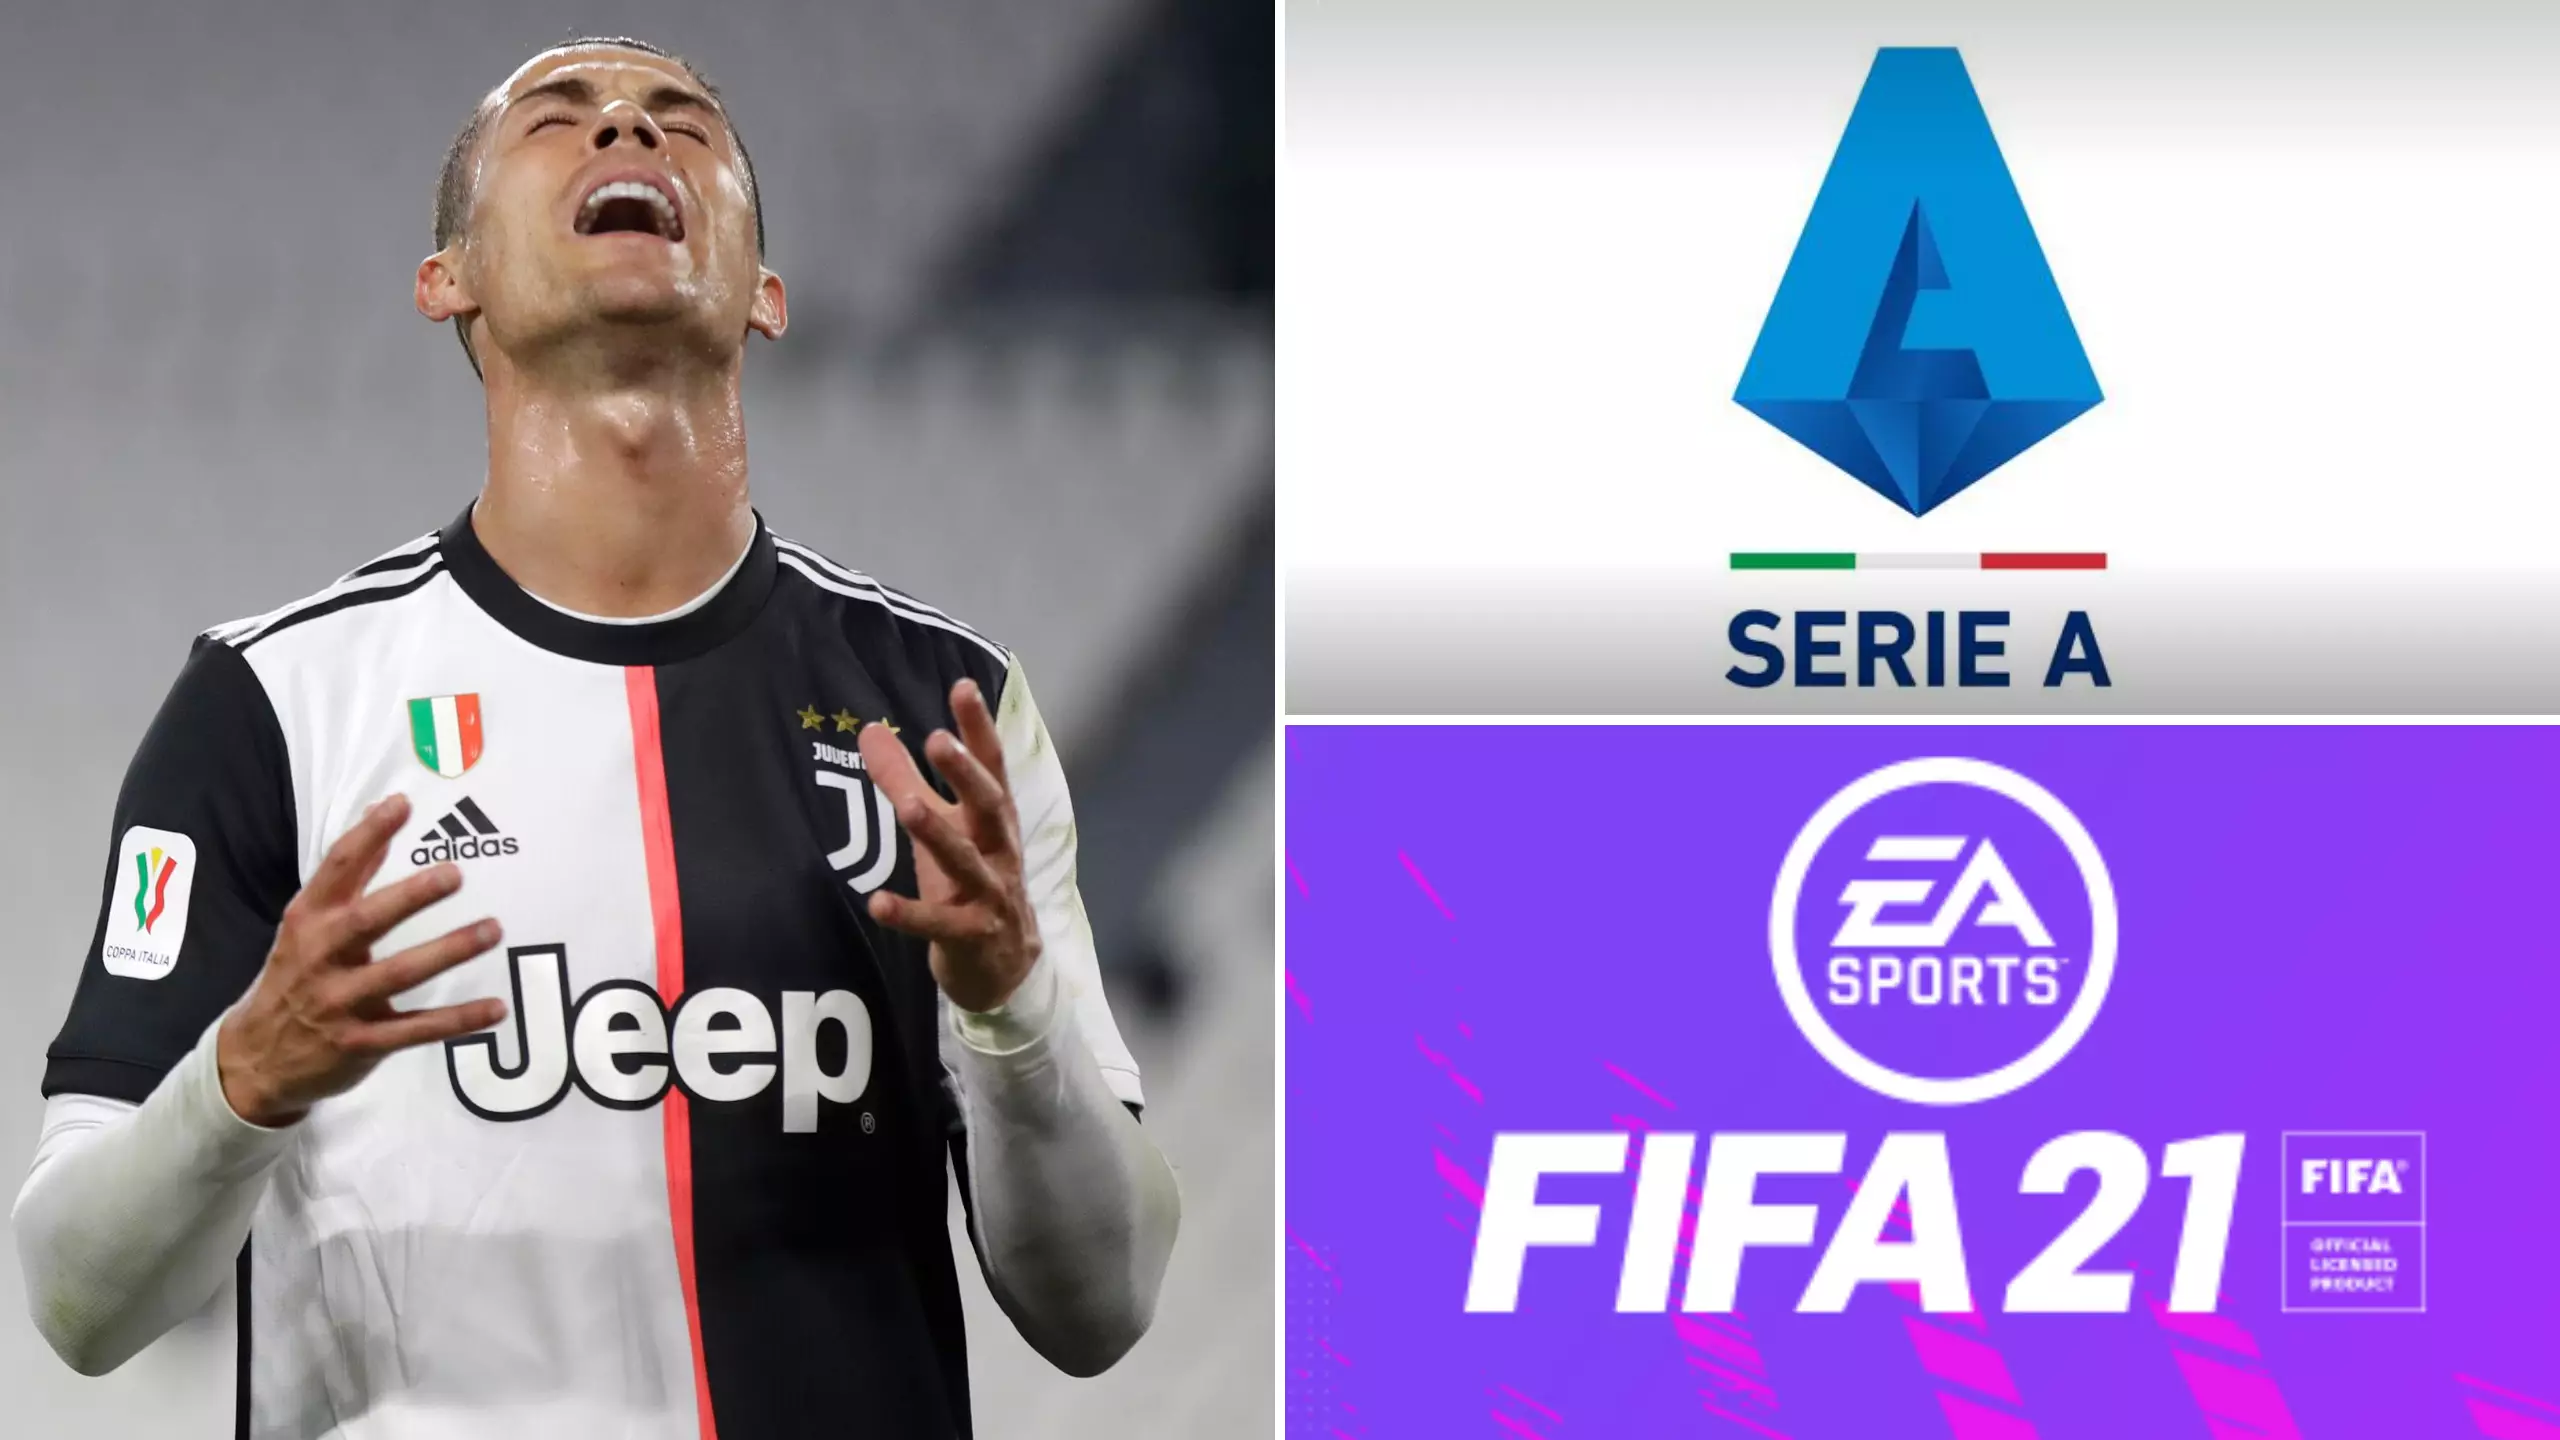 Another Serie A Team Will Be Missing From FIFA 21 Alongside Juventus